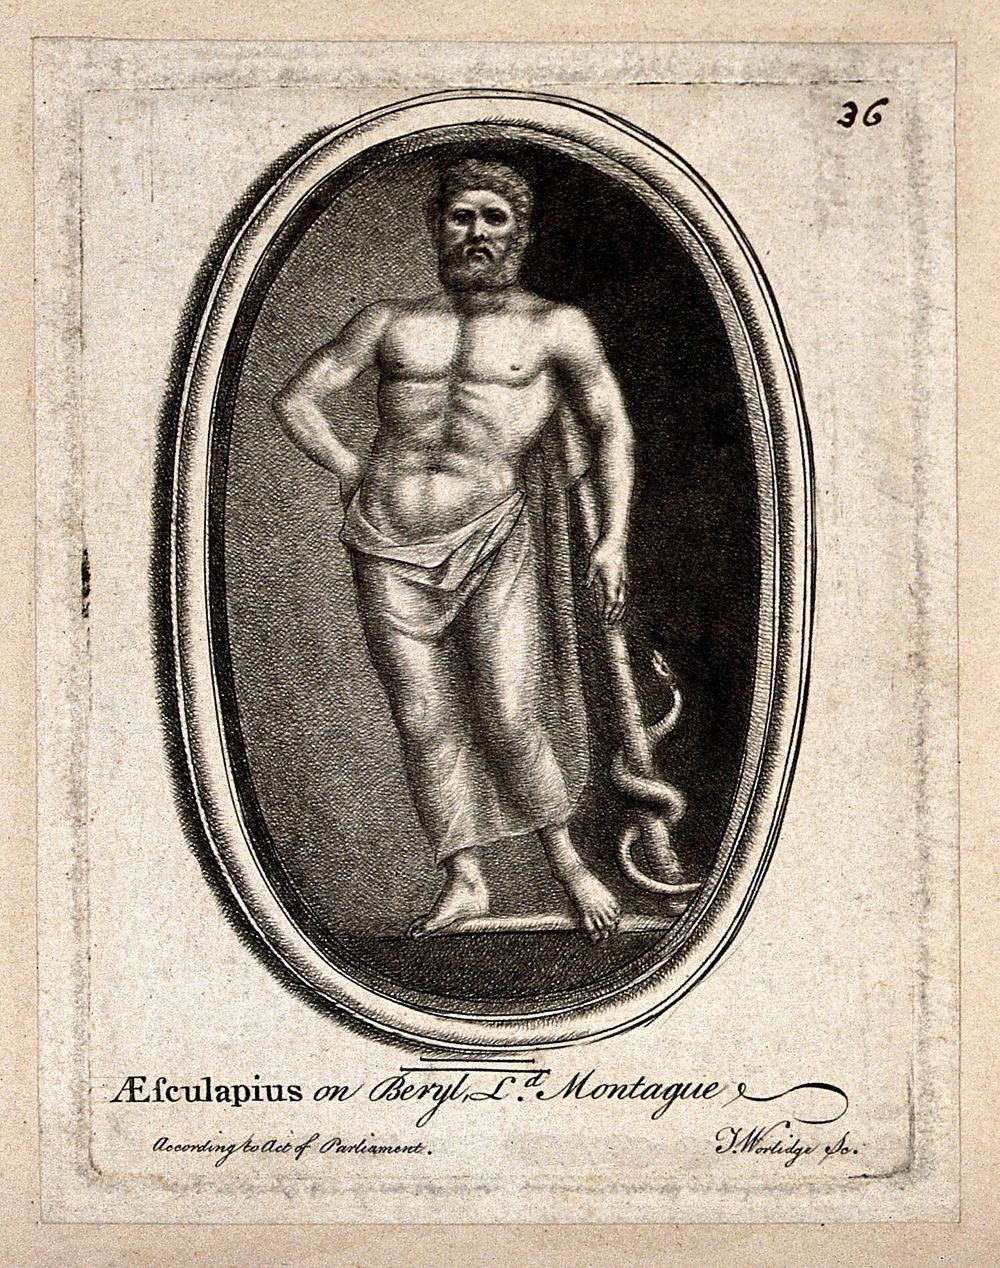 Aesculapius. Etching by T. Worlidge.